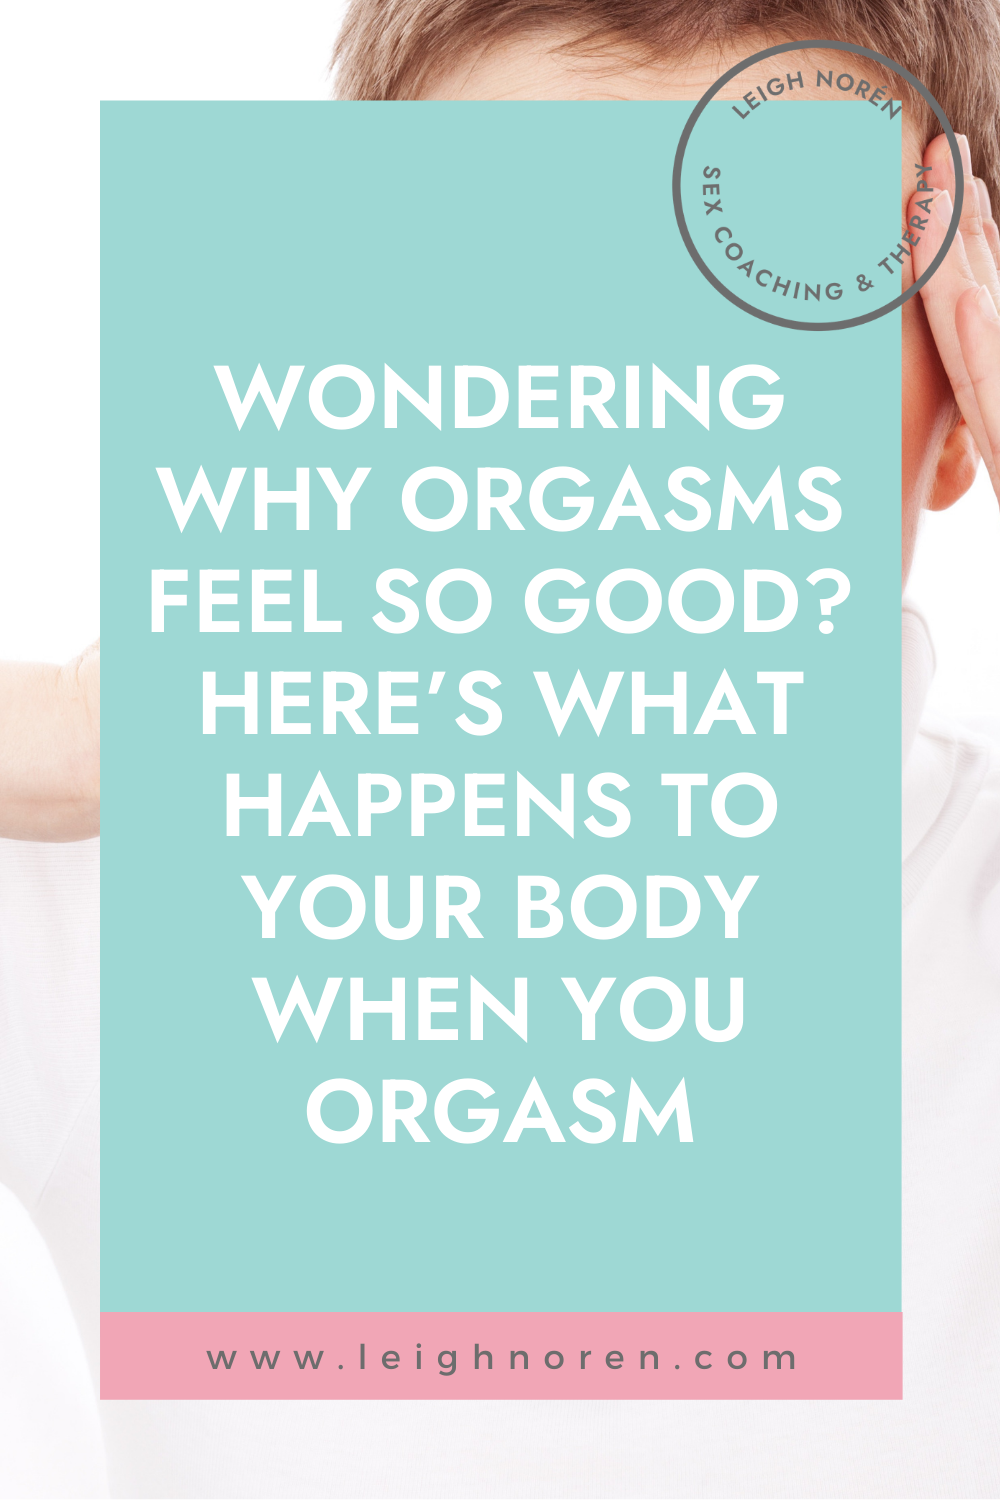 5 Simple Techniques For Do Orgasms Change Over Time? - Smsna